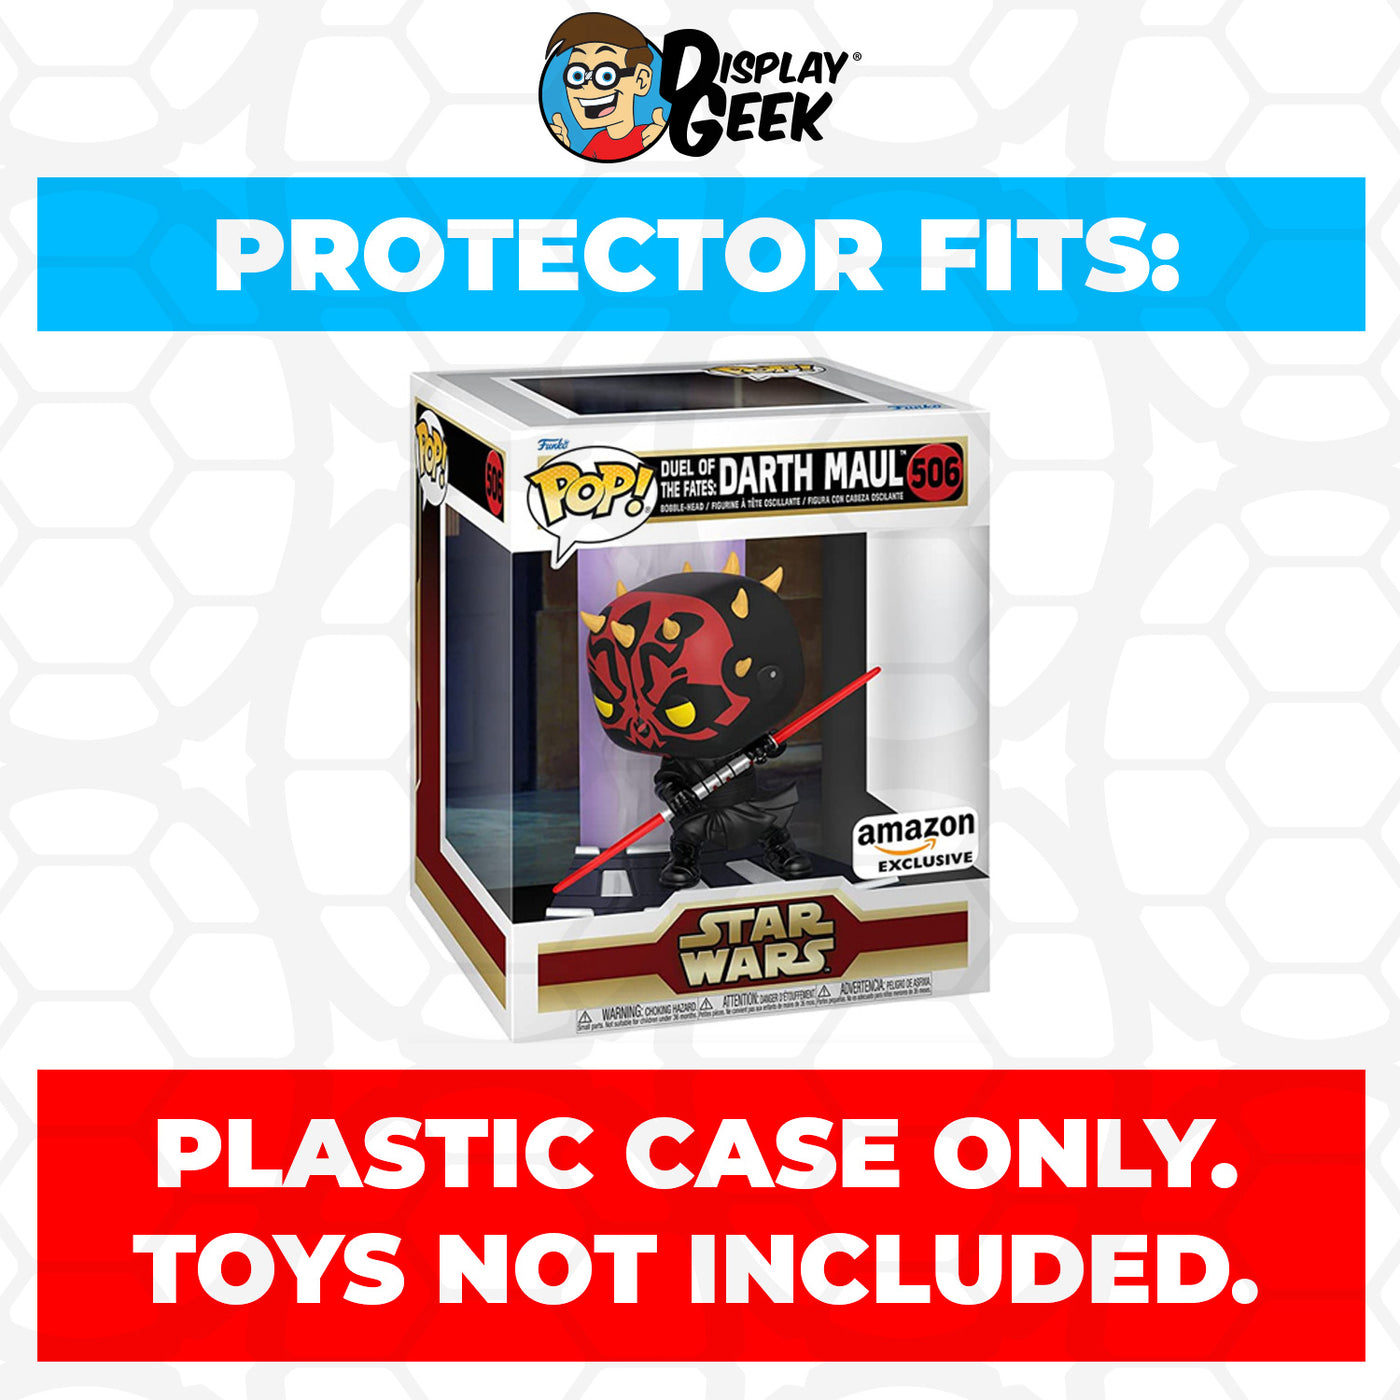 Pop Protector for Duel of the Fates Darth Maul #506 Funko Pop Deluxe on The Protector Guide App by Display Geek